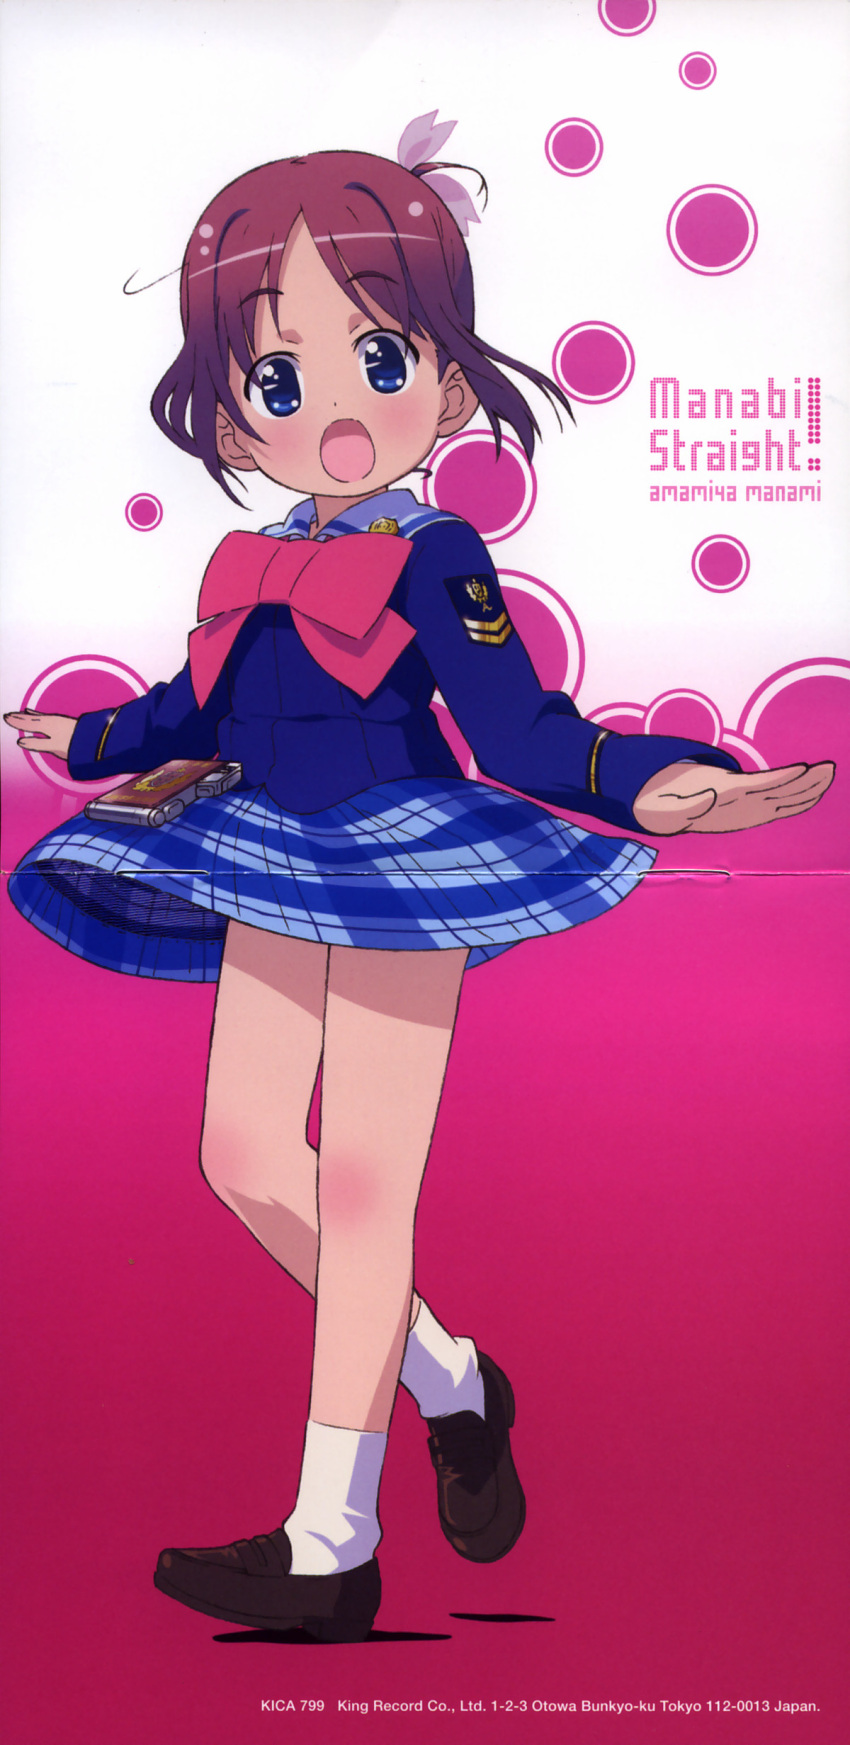 1girl absurdres album_cover amamiya_manami bow cover crease gakuen_utopia_manabi_straight! highres long_image official_art pink_bow plaid plaid_skirt scan skirt solo tall_image